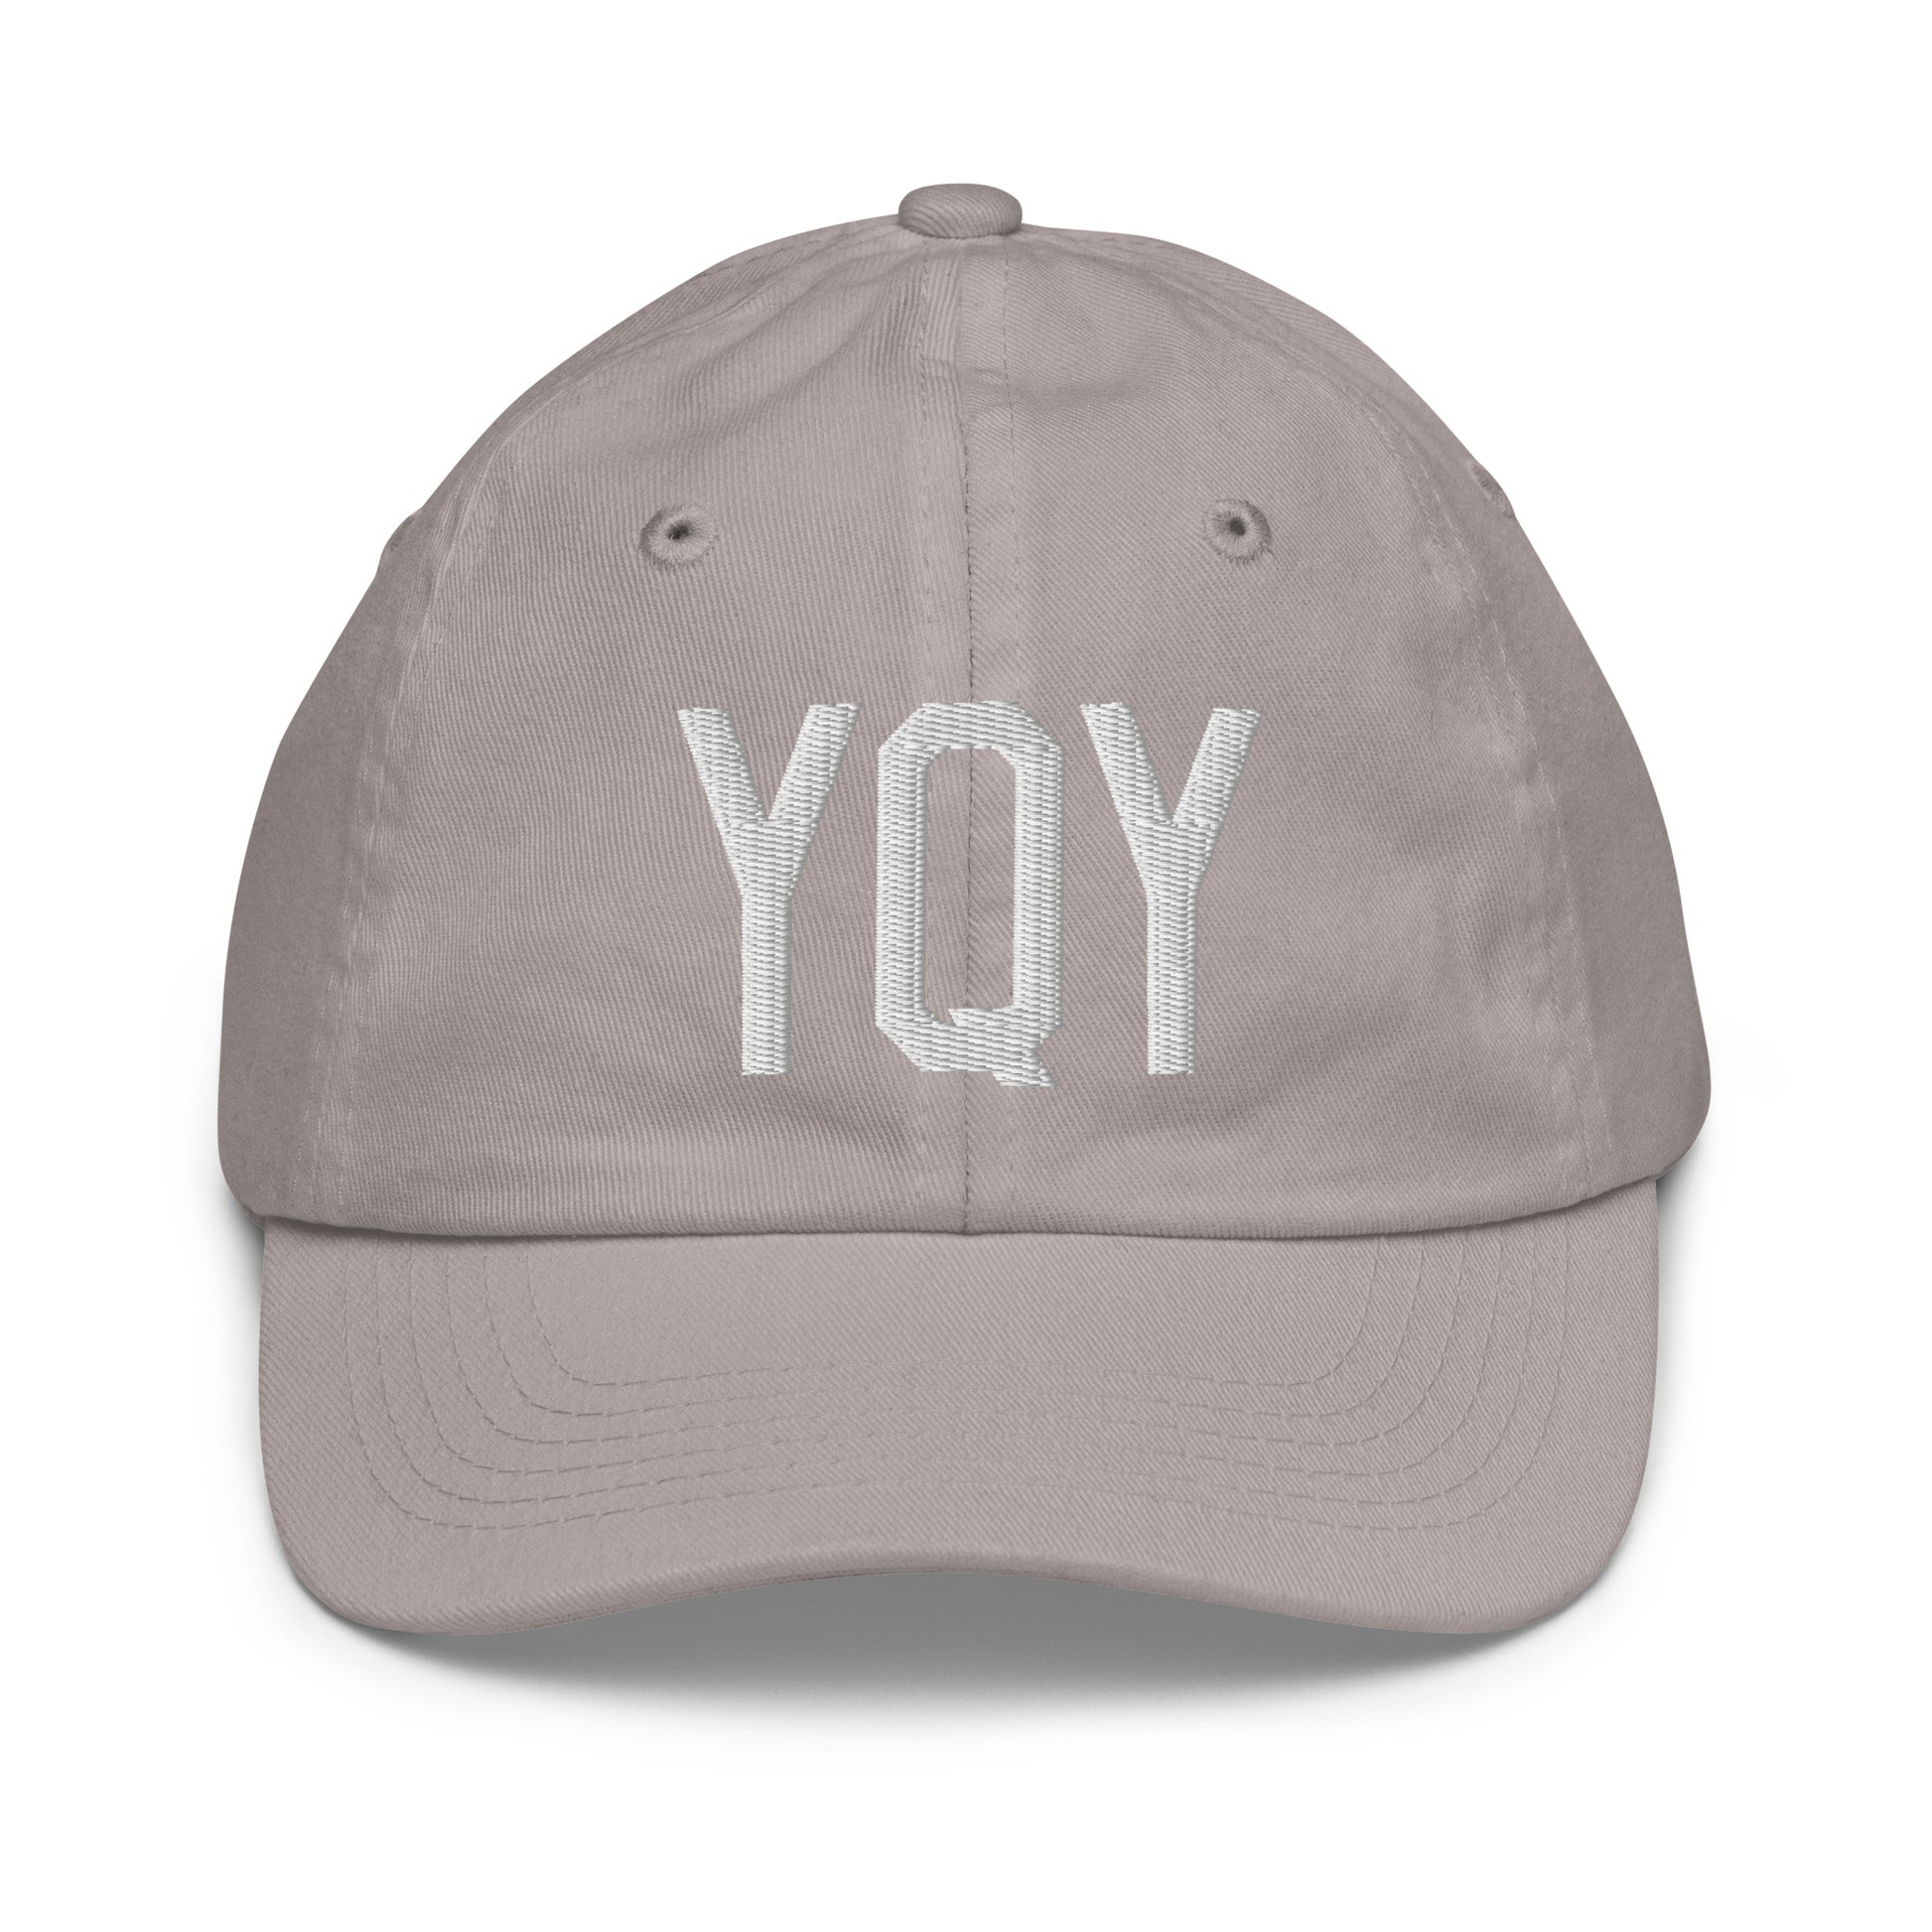 Airport Code Kid's Baseball Cap - White • YQY Sydney • YHM Designs - Image 25